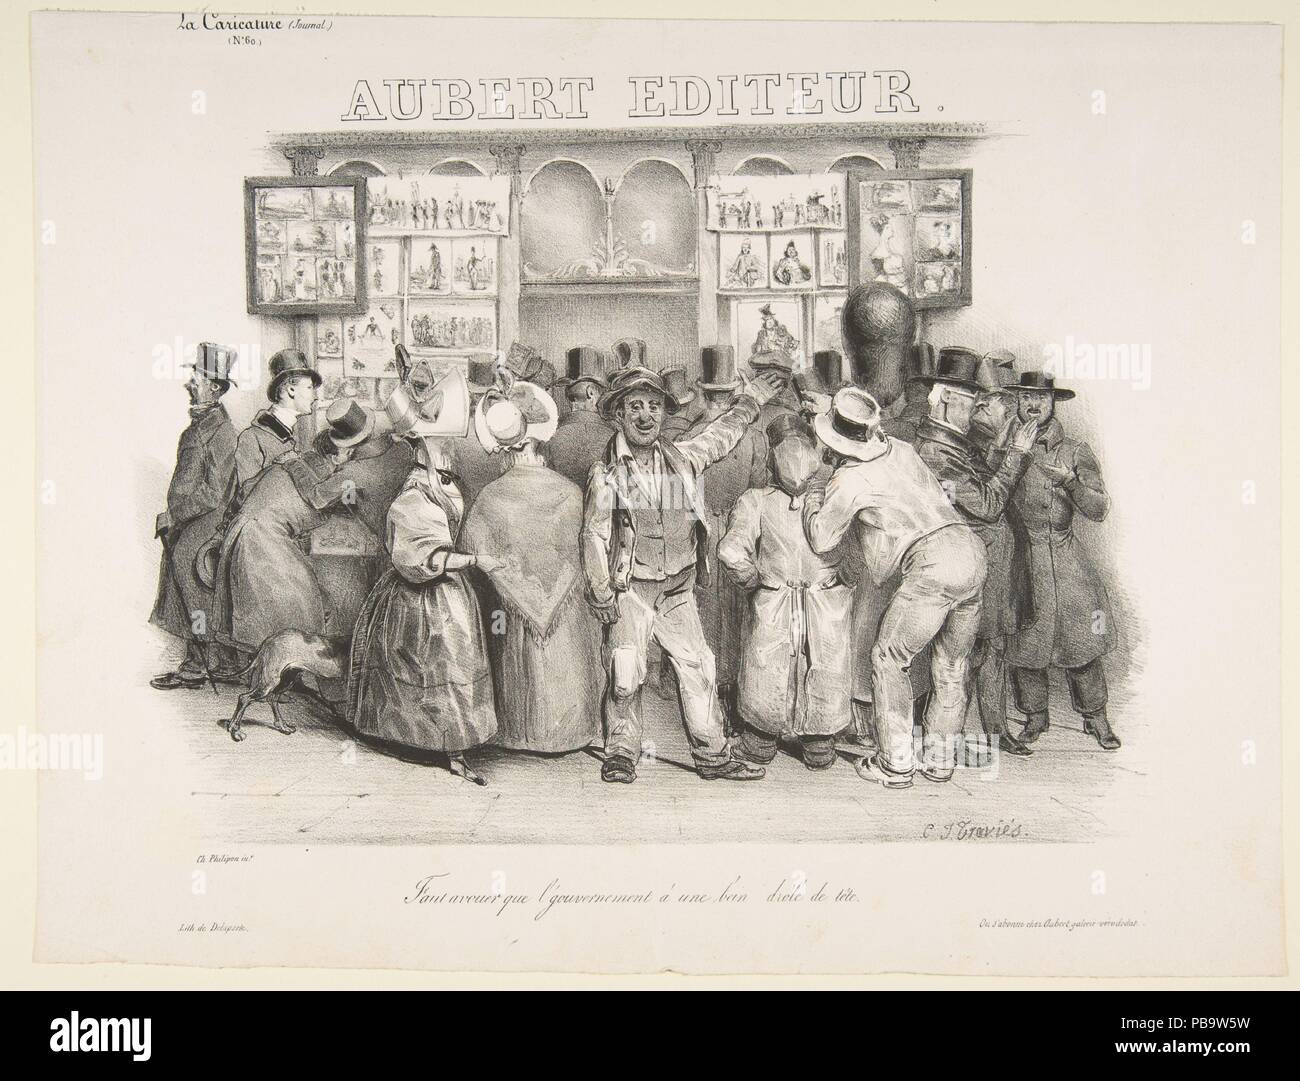 The Publisher Aubert (You must admit the government has a comic appearance). Artist: After Charles Philipon (French, Lyons 1800-1862 Paris); Charles-Joseph Traviès (French, 1804-1859). Dimensions: image: 7 5/8 x 10 13/16 in. (19.4 x 27.5 cm)  sheet: 10 3/16 x 13 1/4 in. (25.9 x 33.7 cm). Lithographer: Lithographed by Delaporte (French, 19th century) , Paris. Series/Portfolio: published in la Caricature, no. 60. Date: 1831. Museum: Metropolitan Museum of Art, New York, USA. Stock Photo